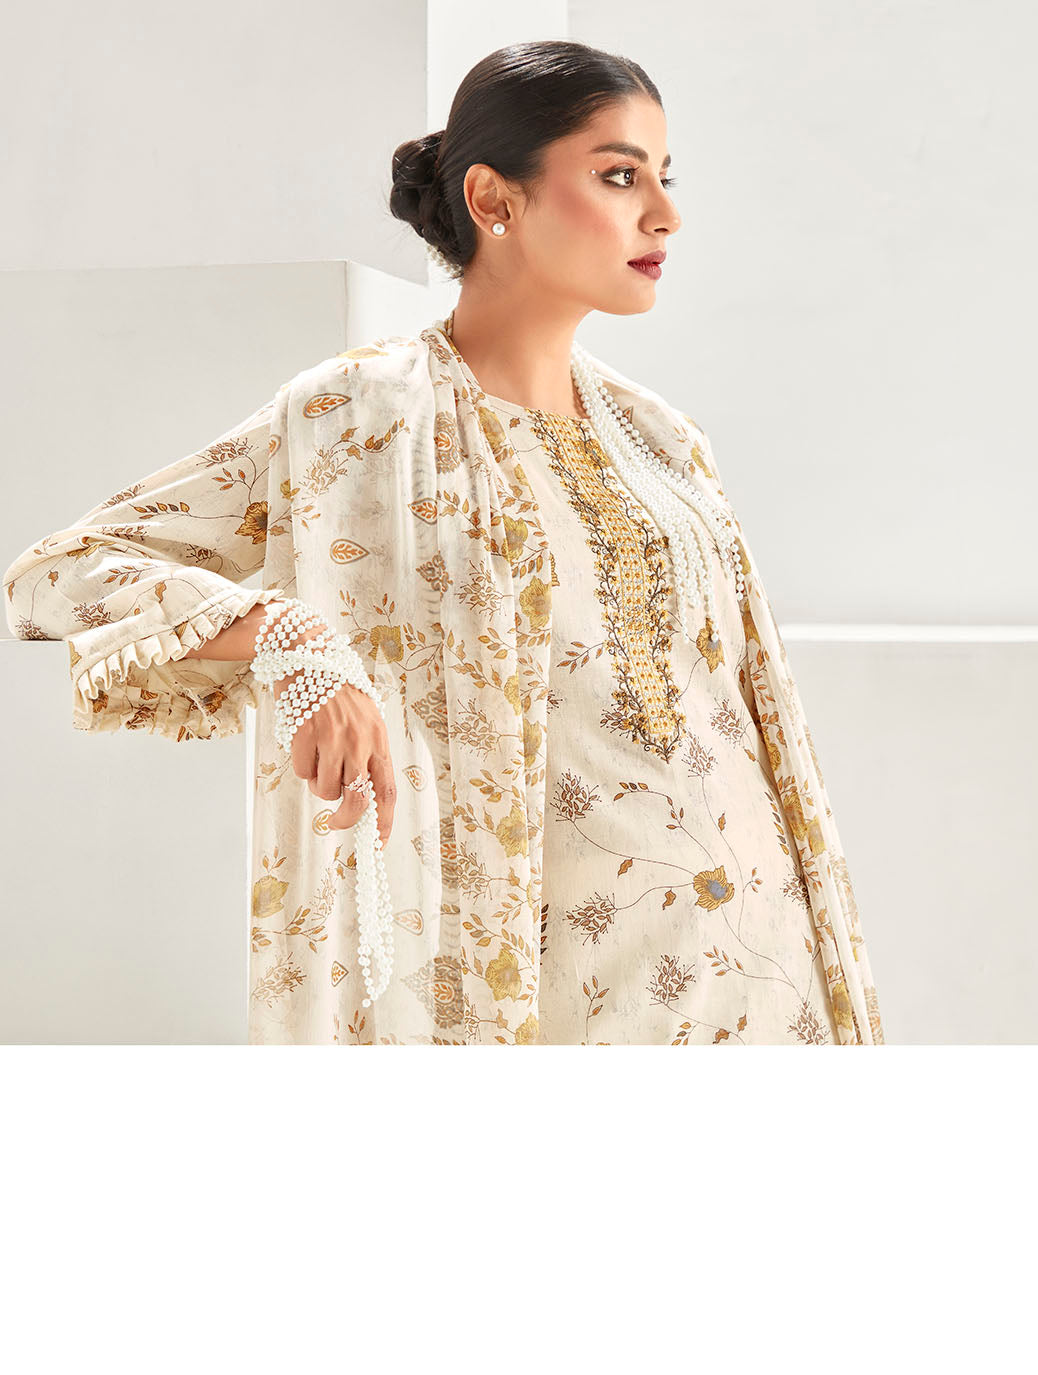 Cotton Off-White Unstitched Suit Dress Material with Chiffon Dupatta